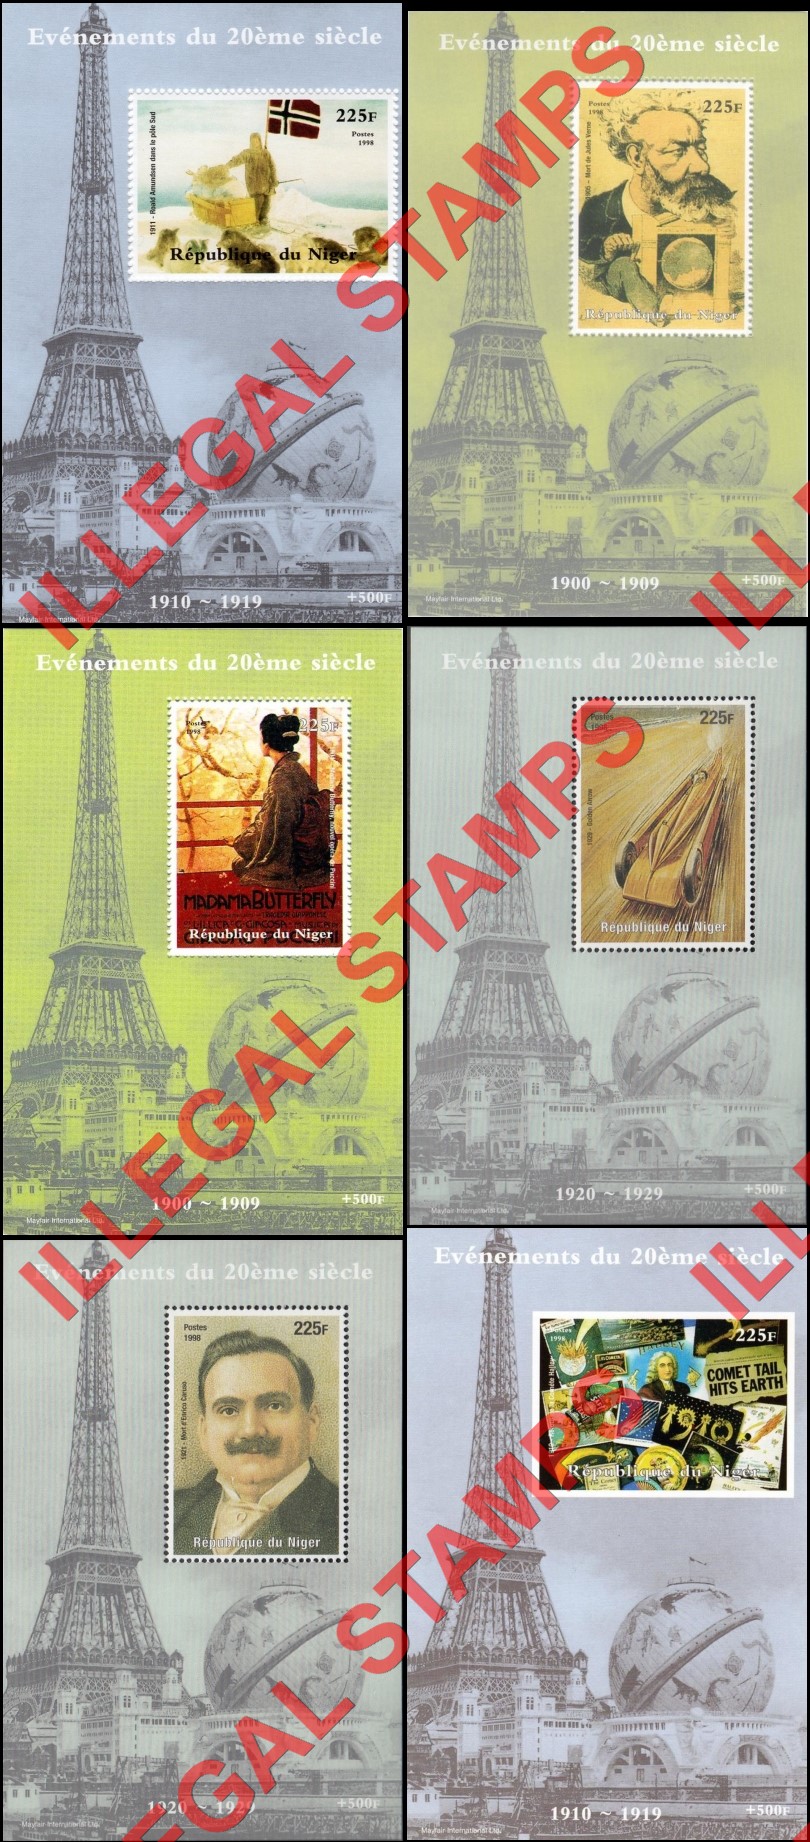 Niger 1998 Events of the 20th Century 225F Illegal Stamp Souvenir Sheets of 1 (Part 2)